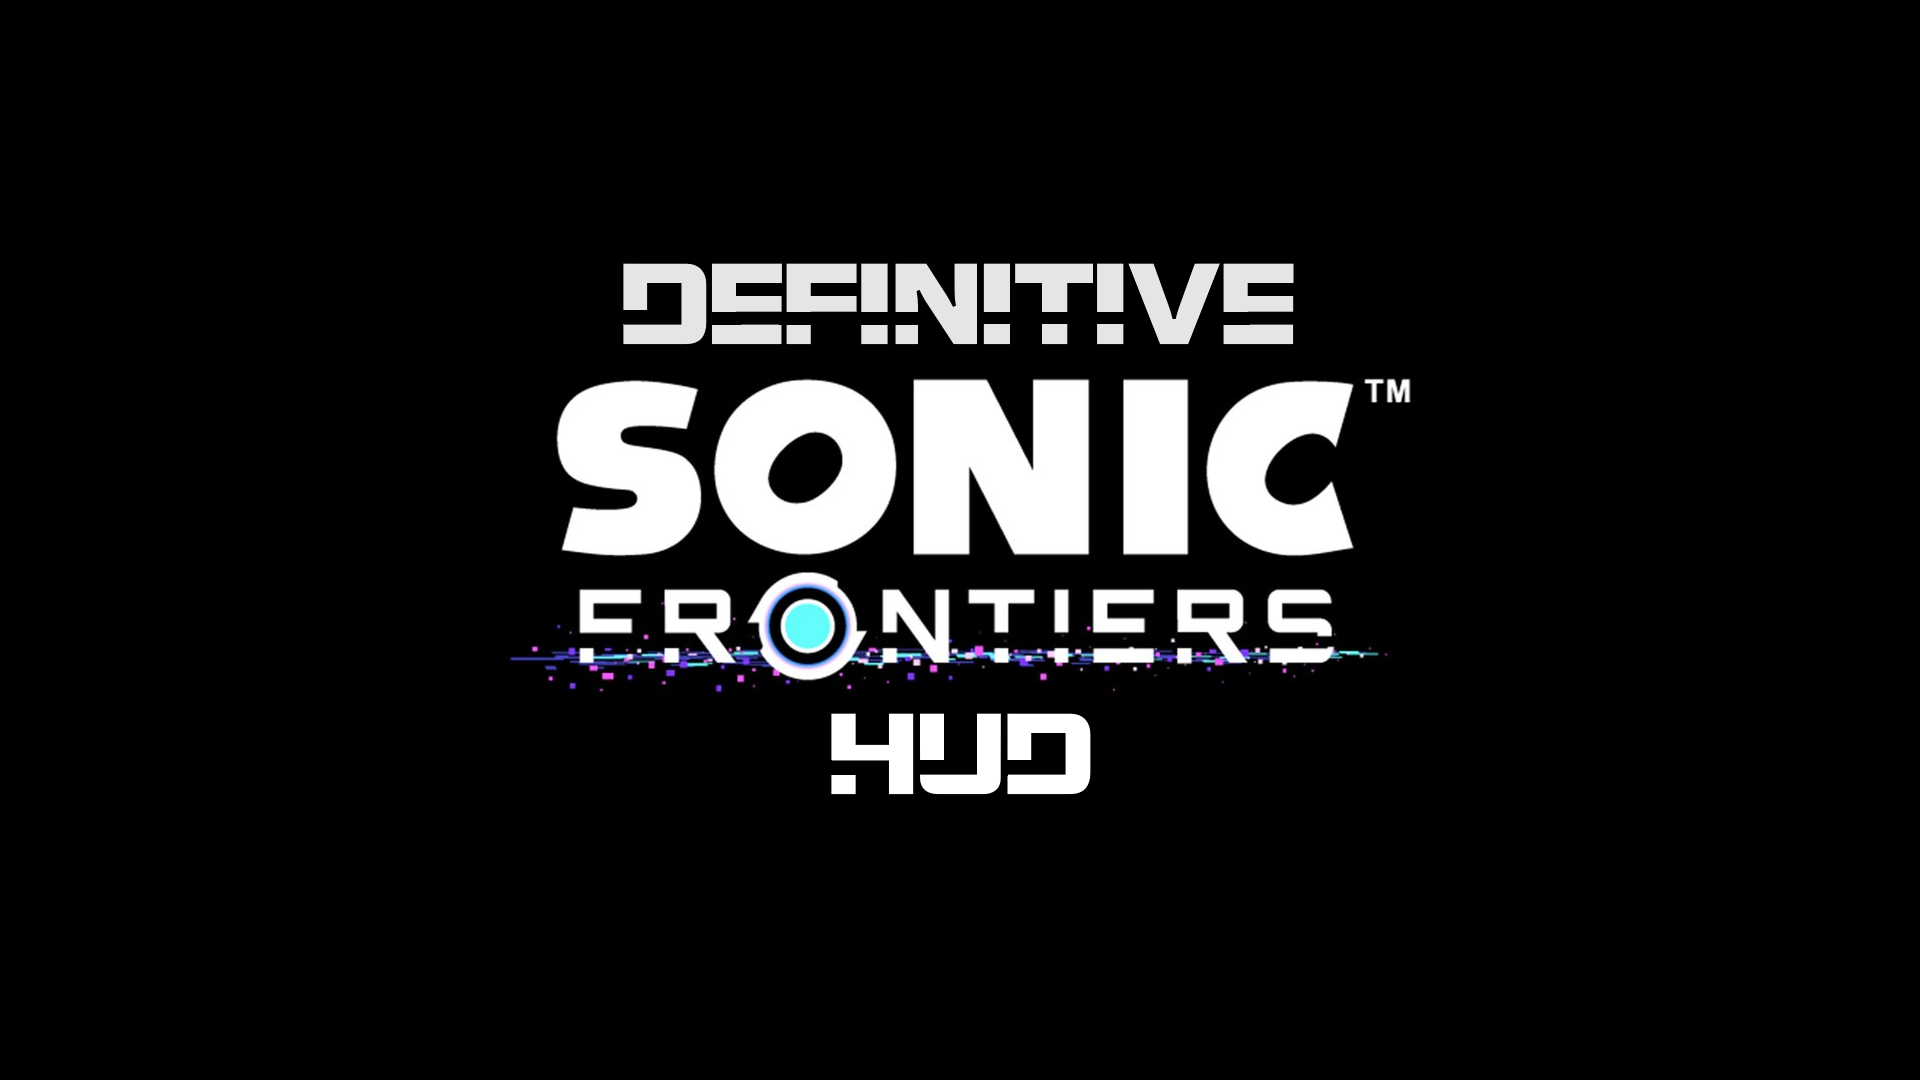 Sonic Hacking Contest :: The SHC2022 Contest :: SHC2022 Sonic.EXE mega  drive :: By mohammedyasir (lavagaming1)